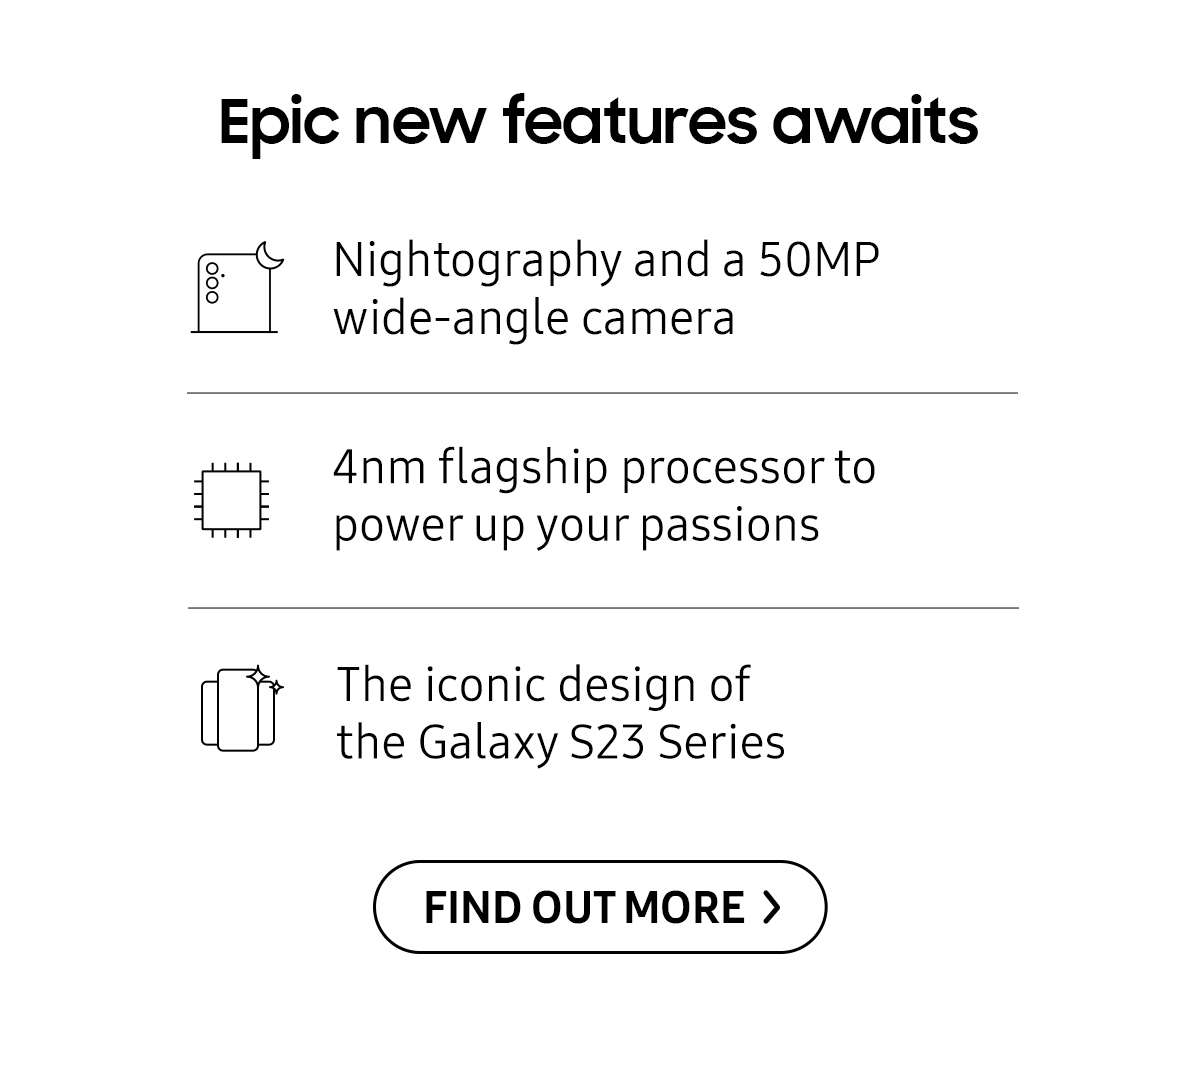 Epic new features awaits | Click here to find out more!